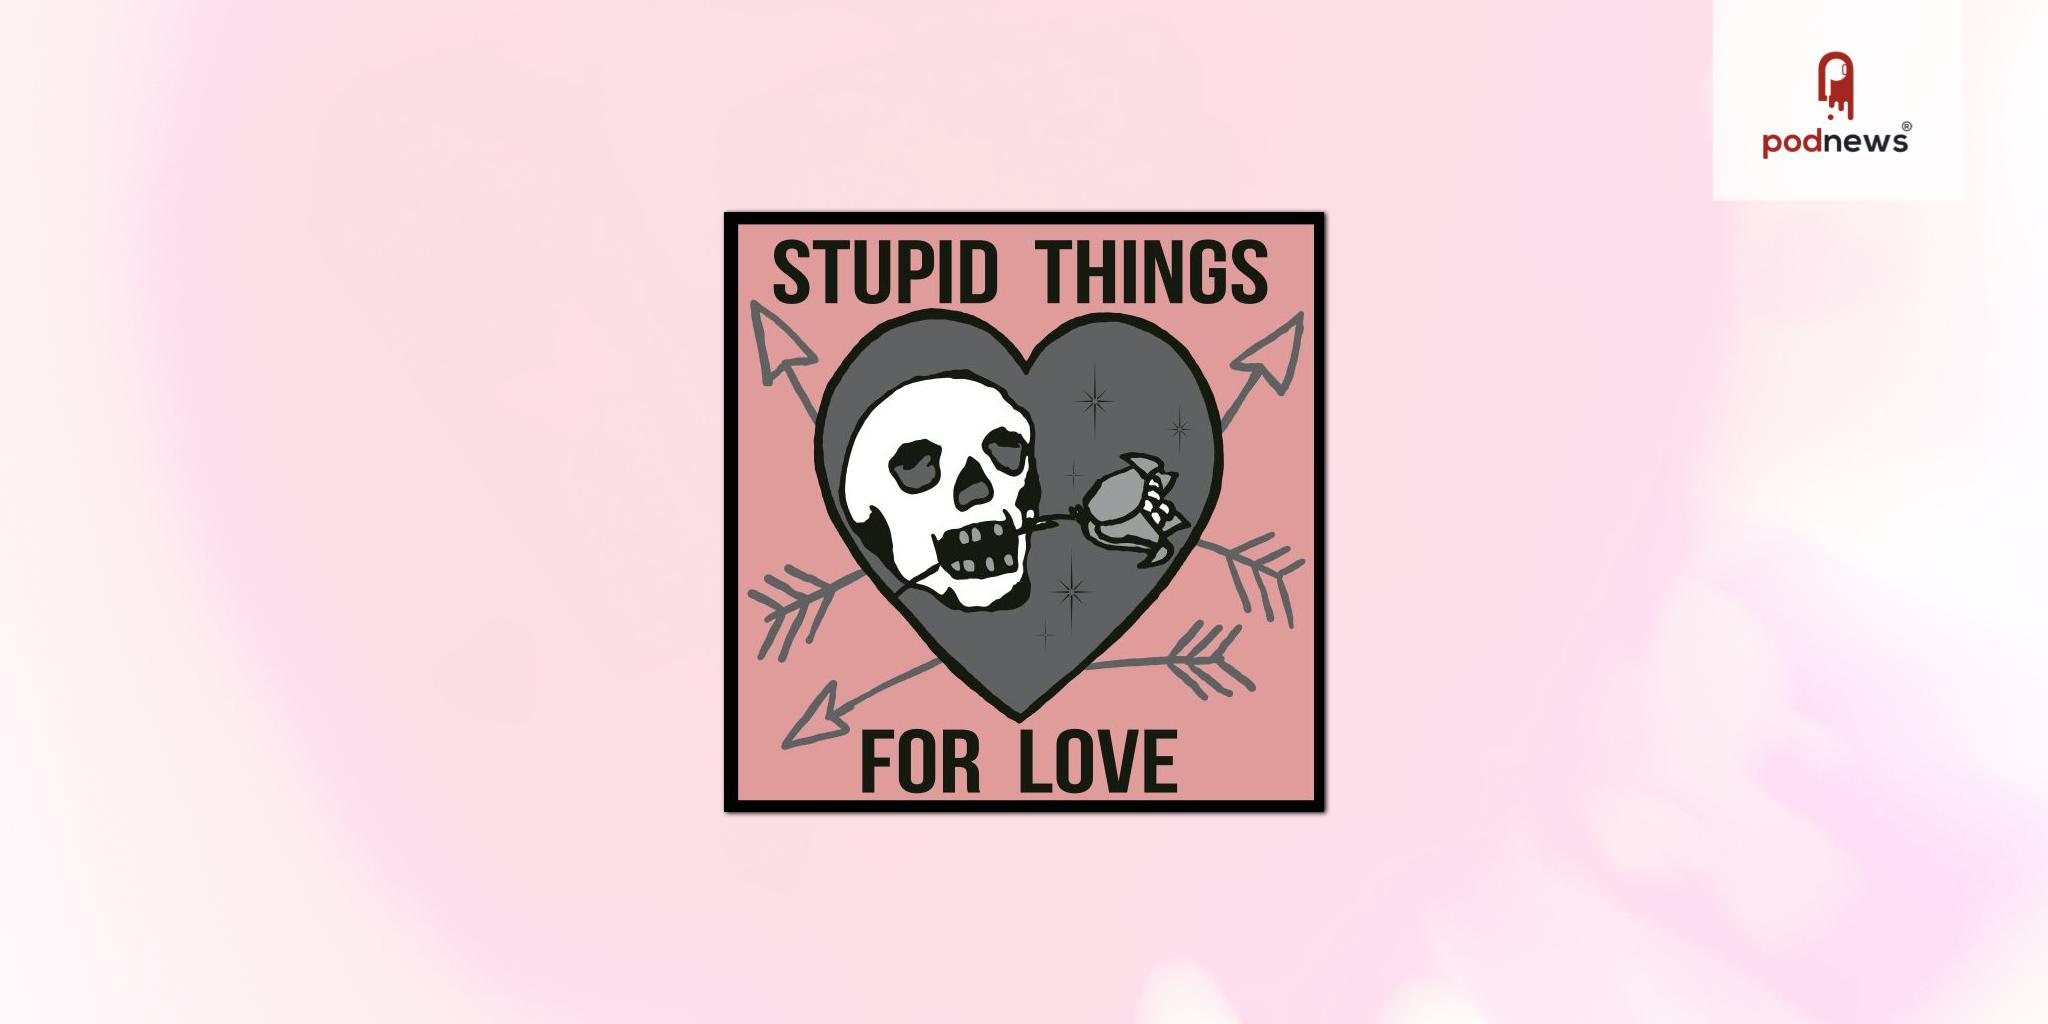 AdLarge Welcomes Stupid Things for Love to Podcast Network